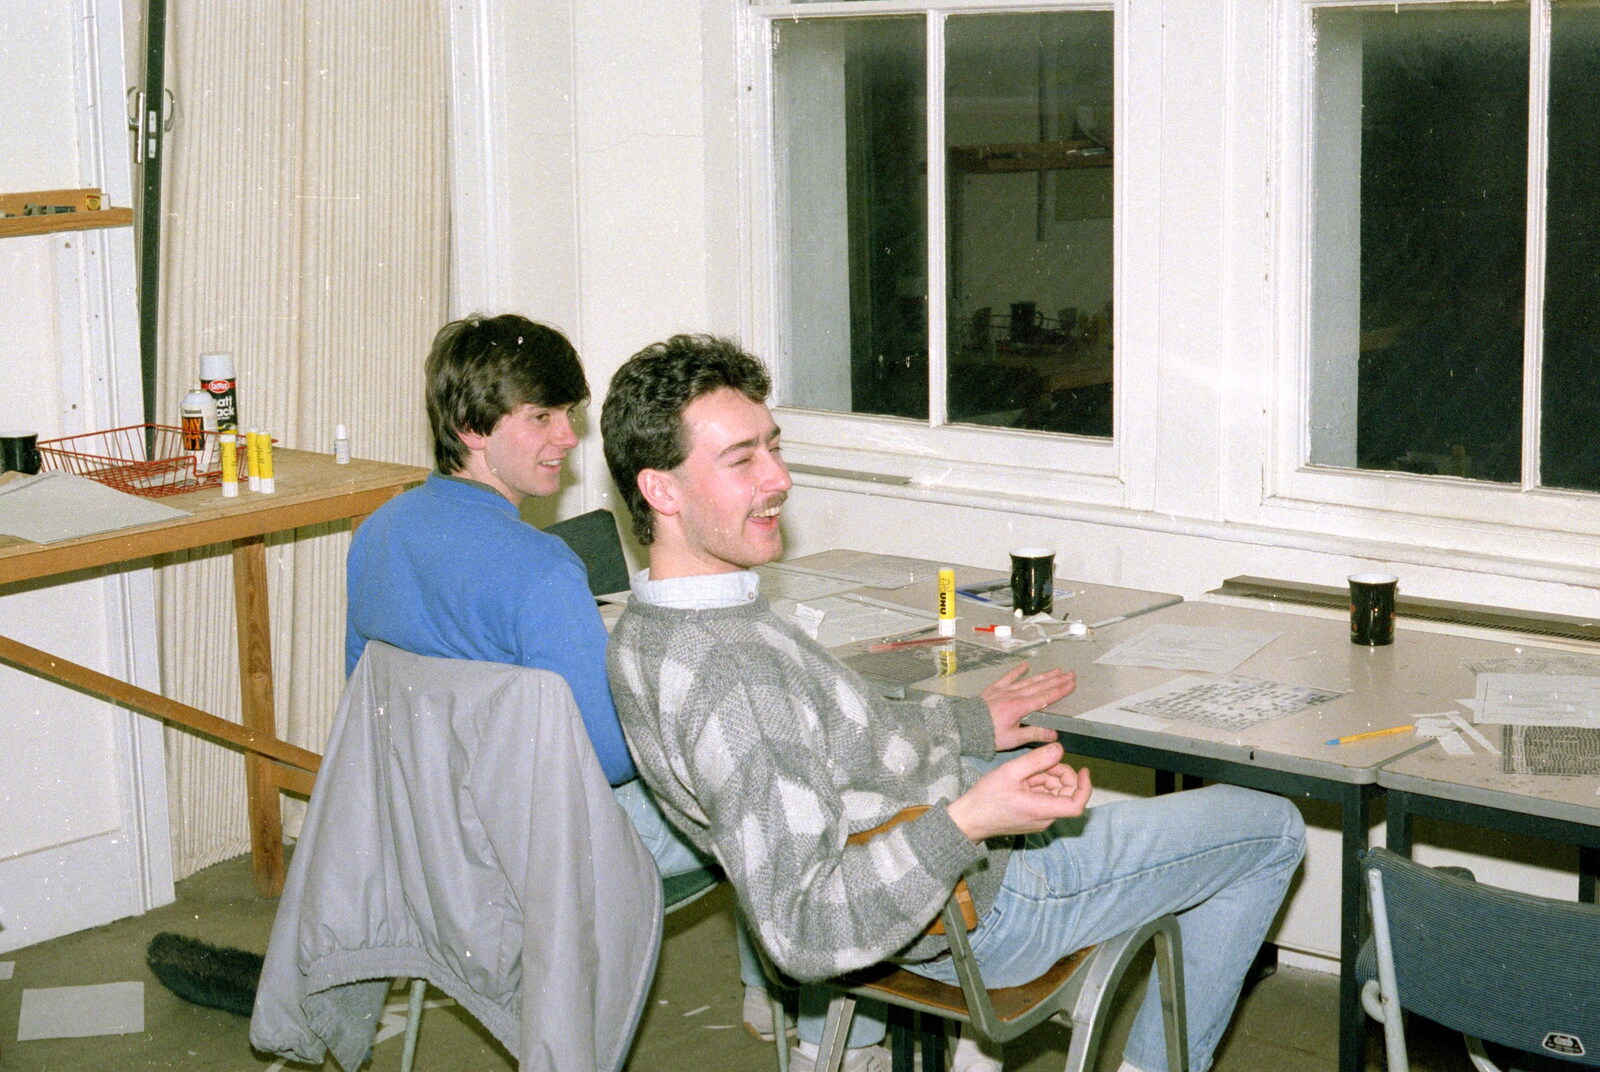 Mark Wilkins in the Fly layout room from Uni: A Night In The Bank and Fly Magazine, Plymouth Polytechnic, Devon - March 10th 1986